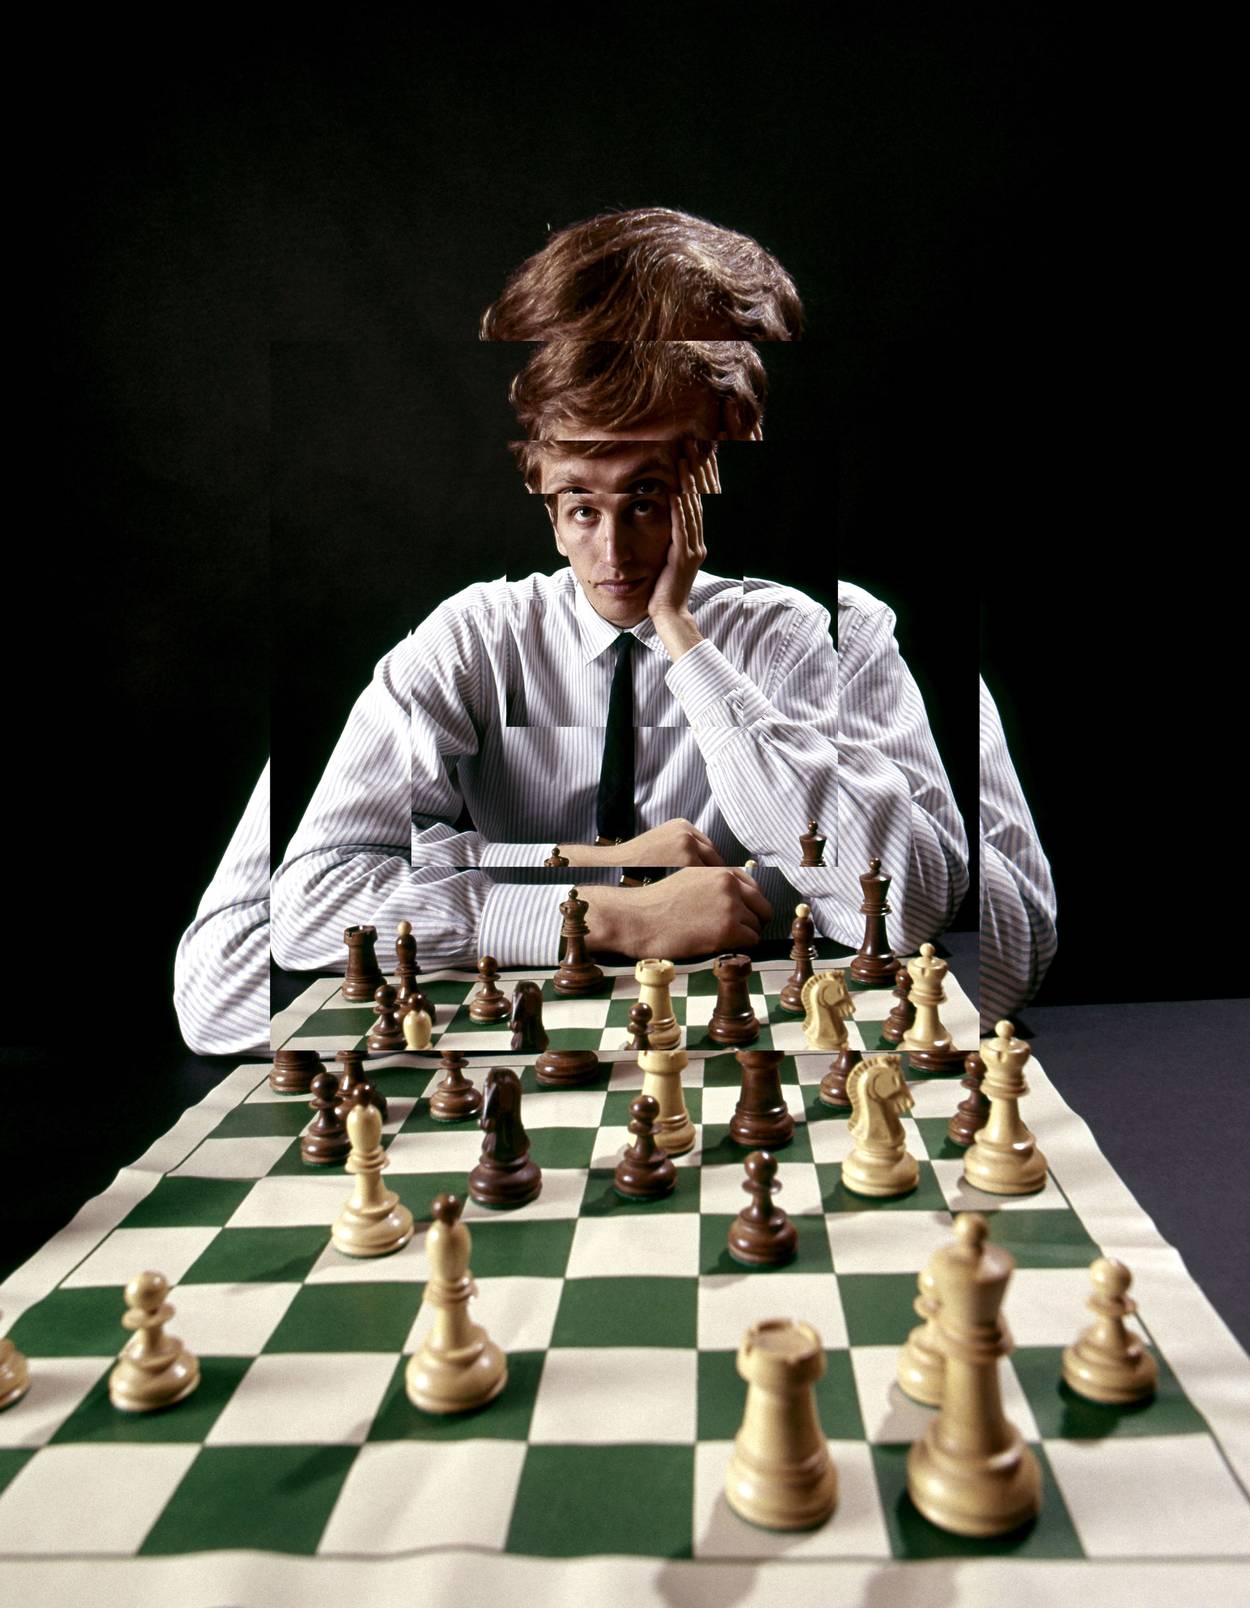 Was Bobby Fischer a chess genius or something else? - Quora